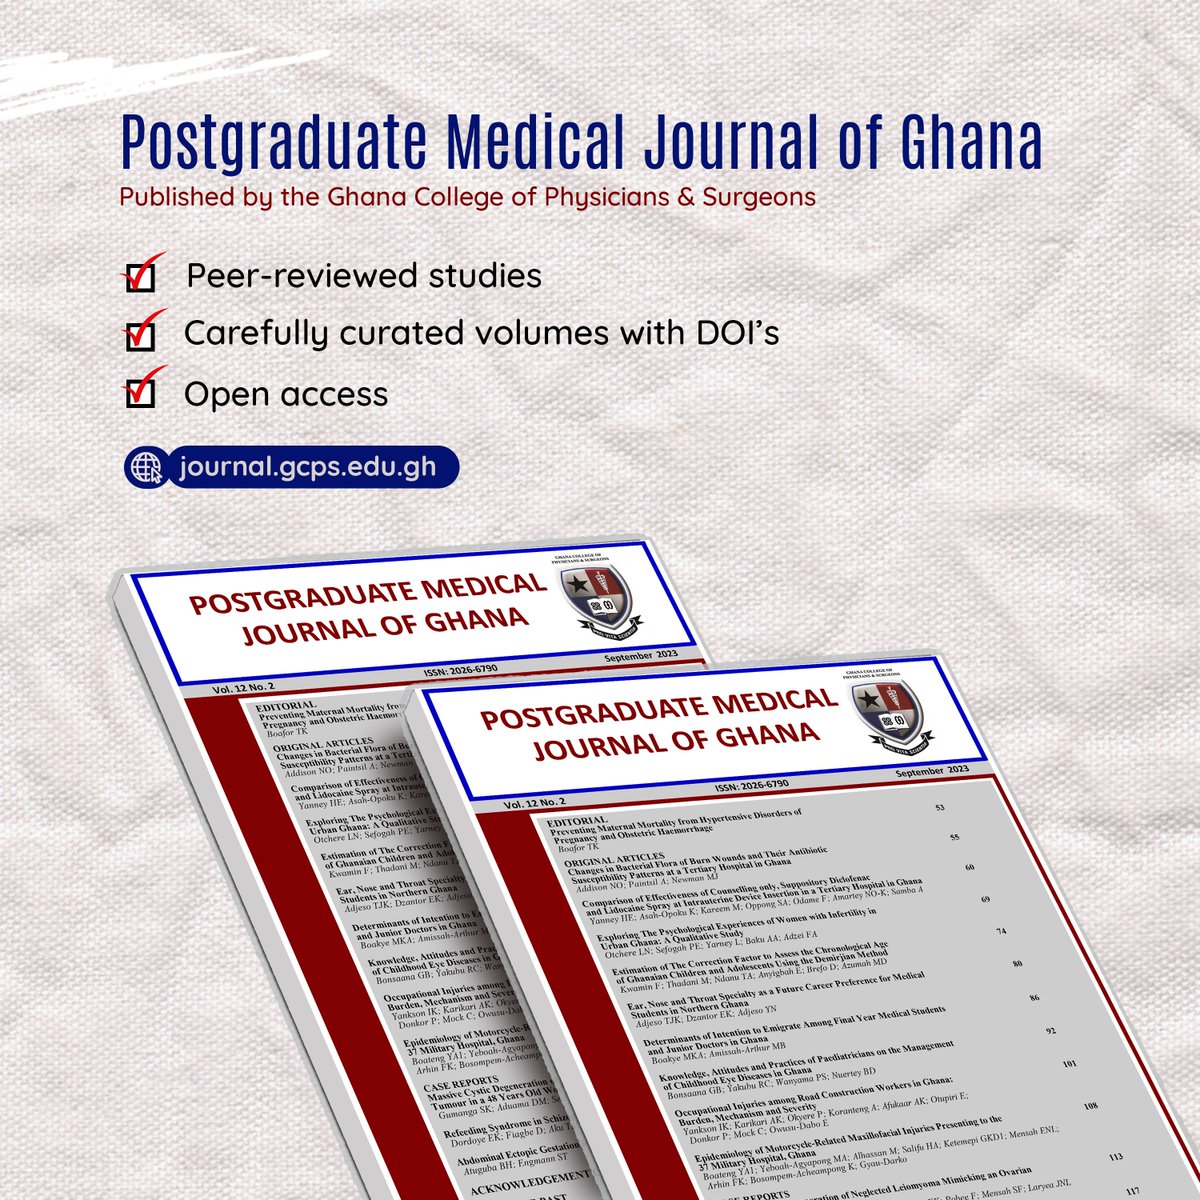 The Postgraduate Medical Journal of Ghana (PMJG) aims to provide cost-free access to scholarly articles and original research findings in the medical field to the scientific community. Visit the PMJG website to access our latest issue. journal.gcps.edu.gh/index.php/pmjg